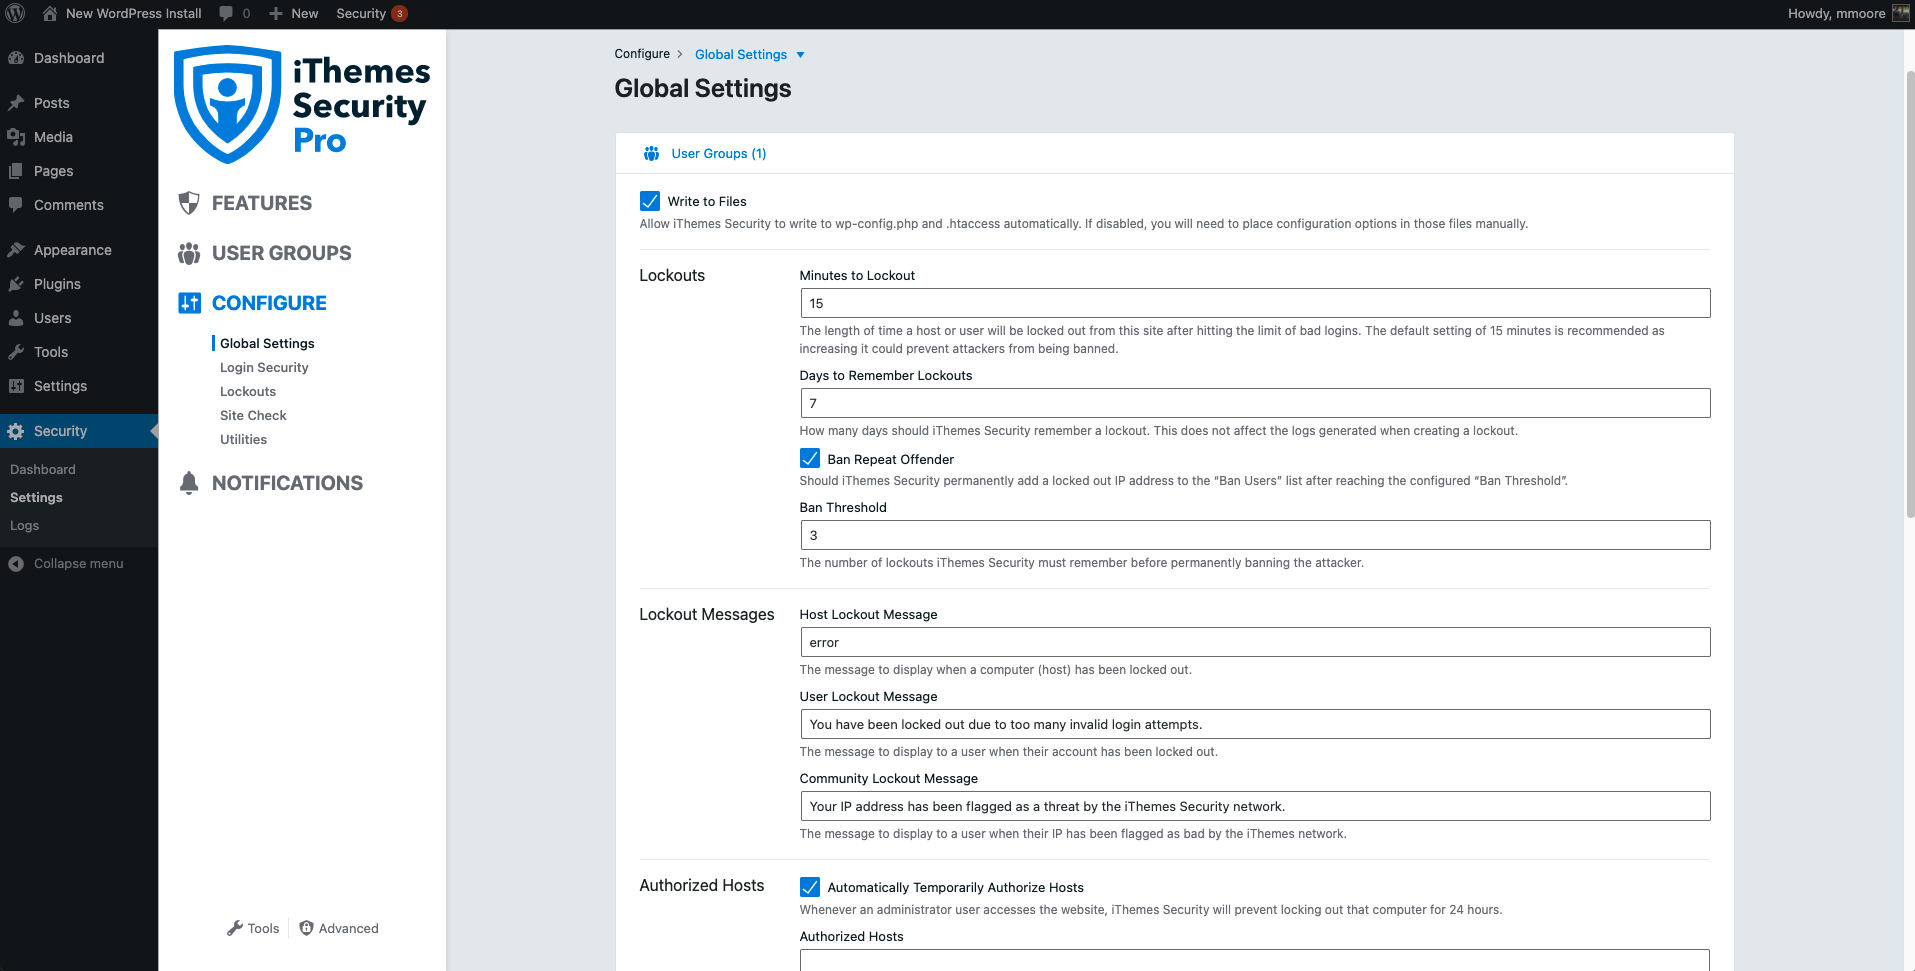 ithemes-security-pro-configure-global-settings.png